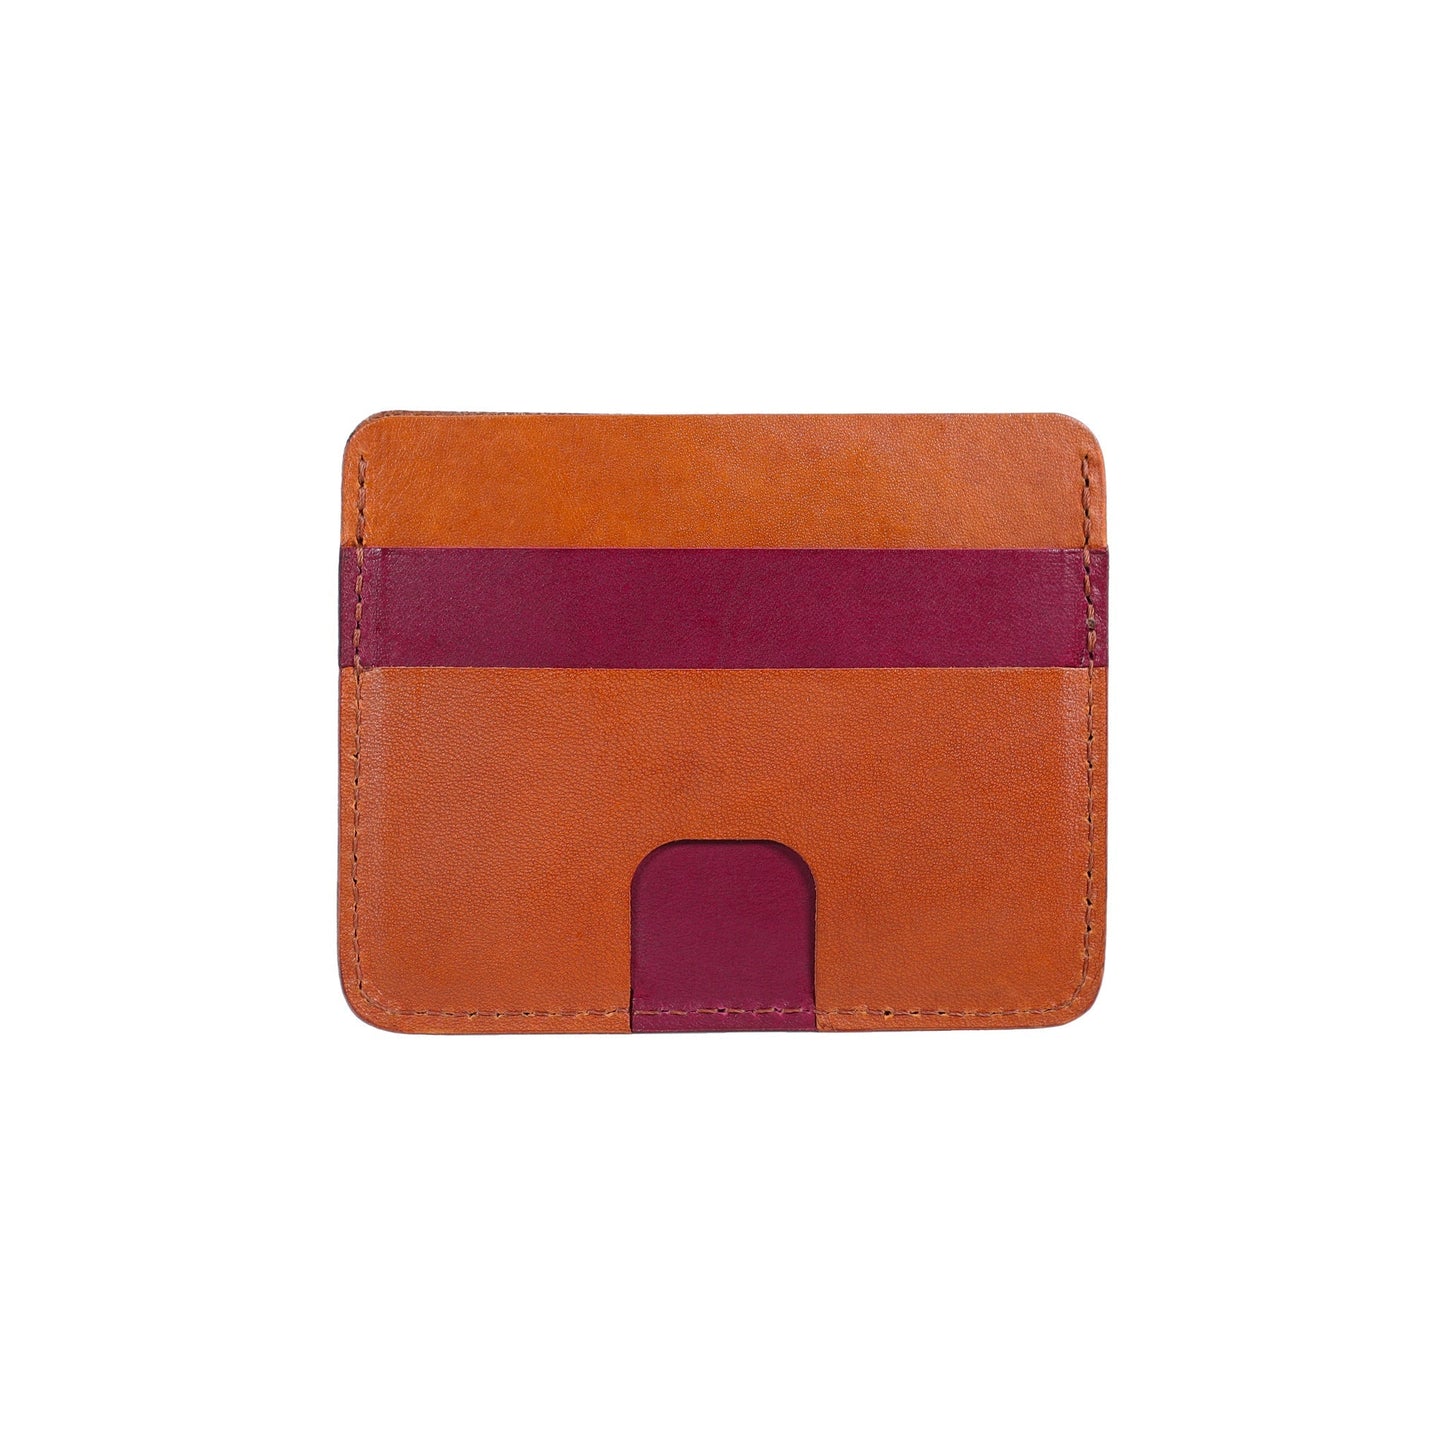 Red and Brown Leather Card Holder Wallet